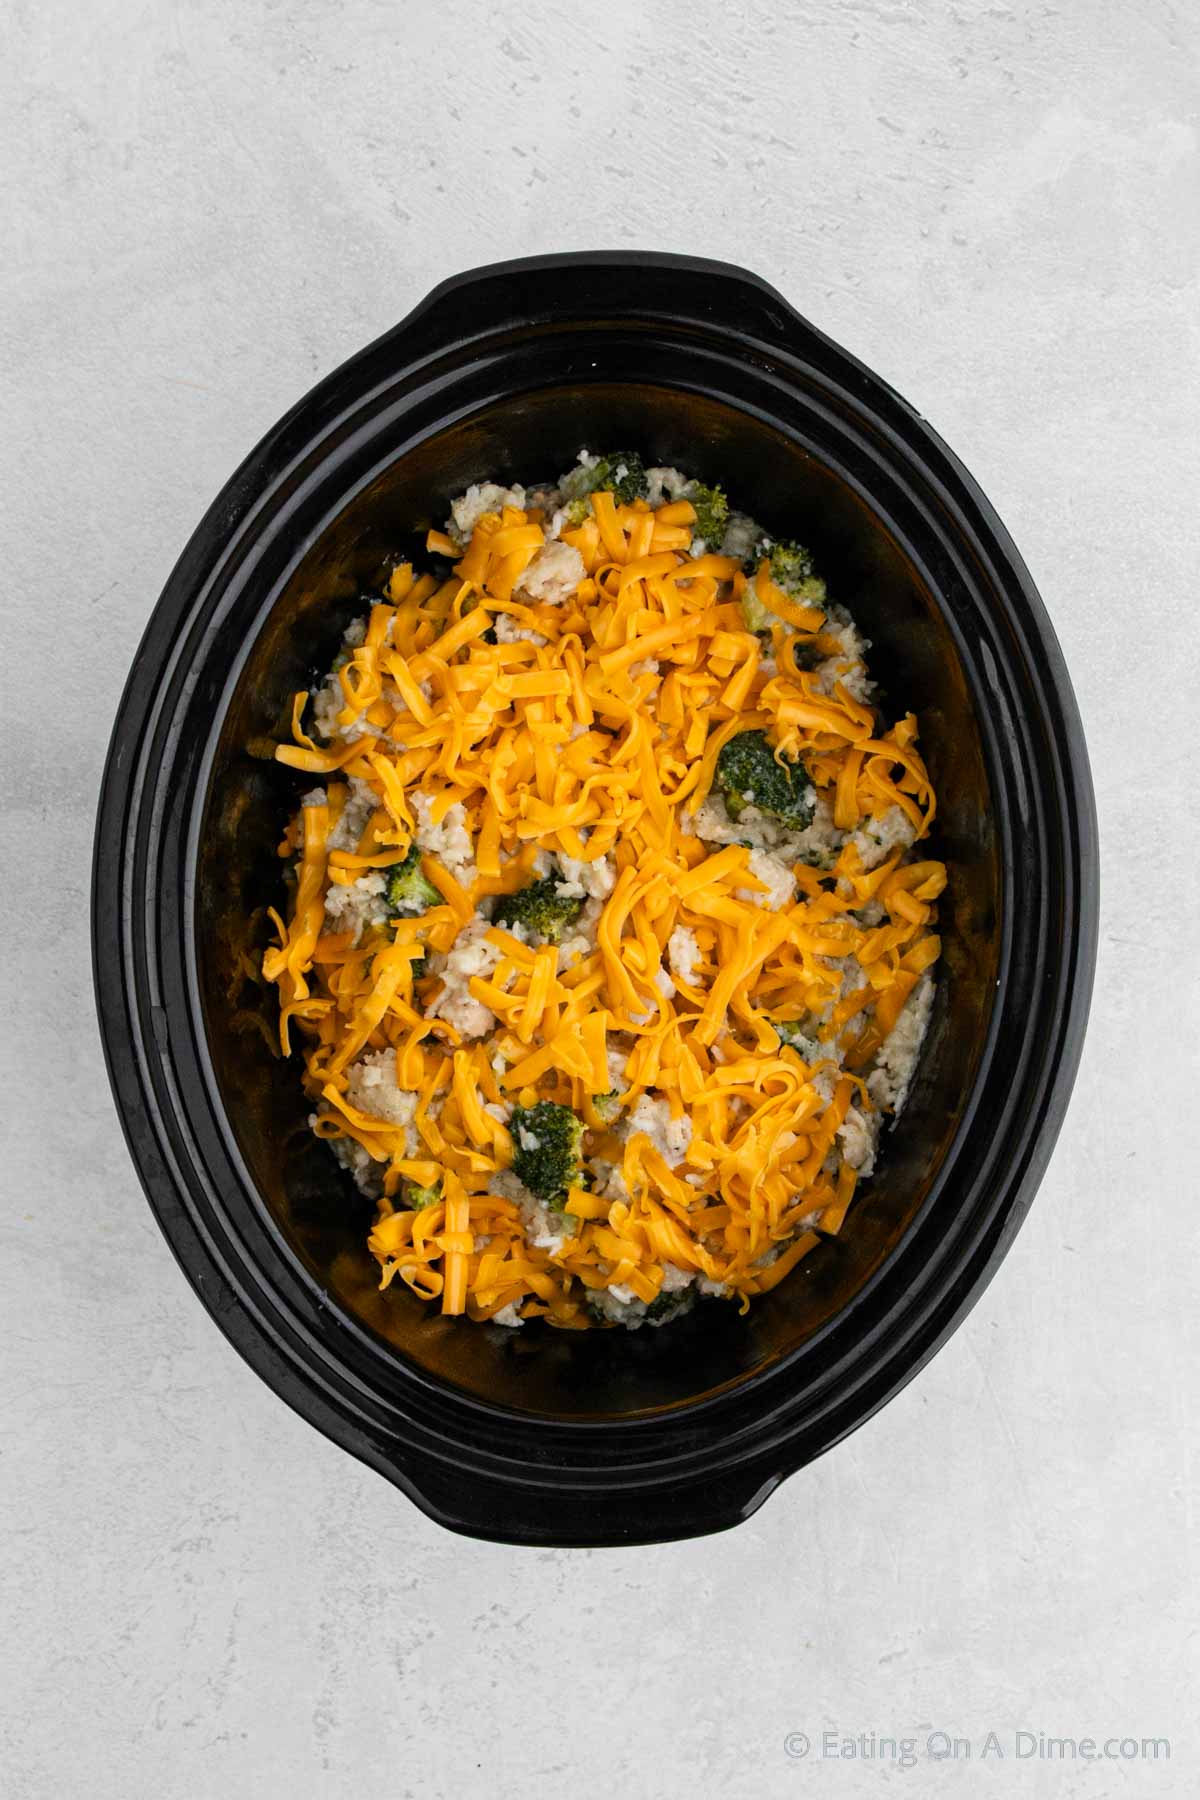 Topping the broccoli chicken mixture with cheese in the slow cooker